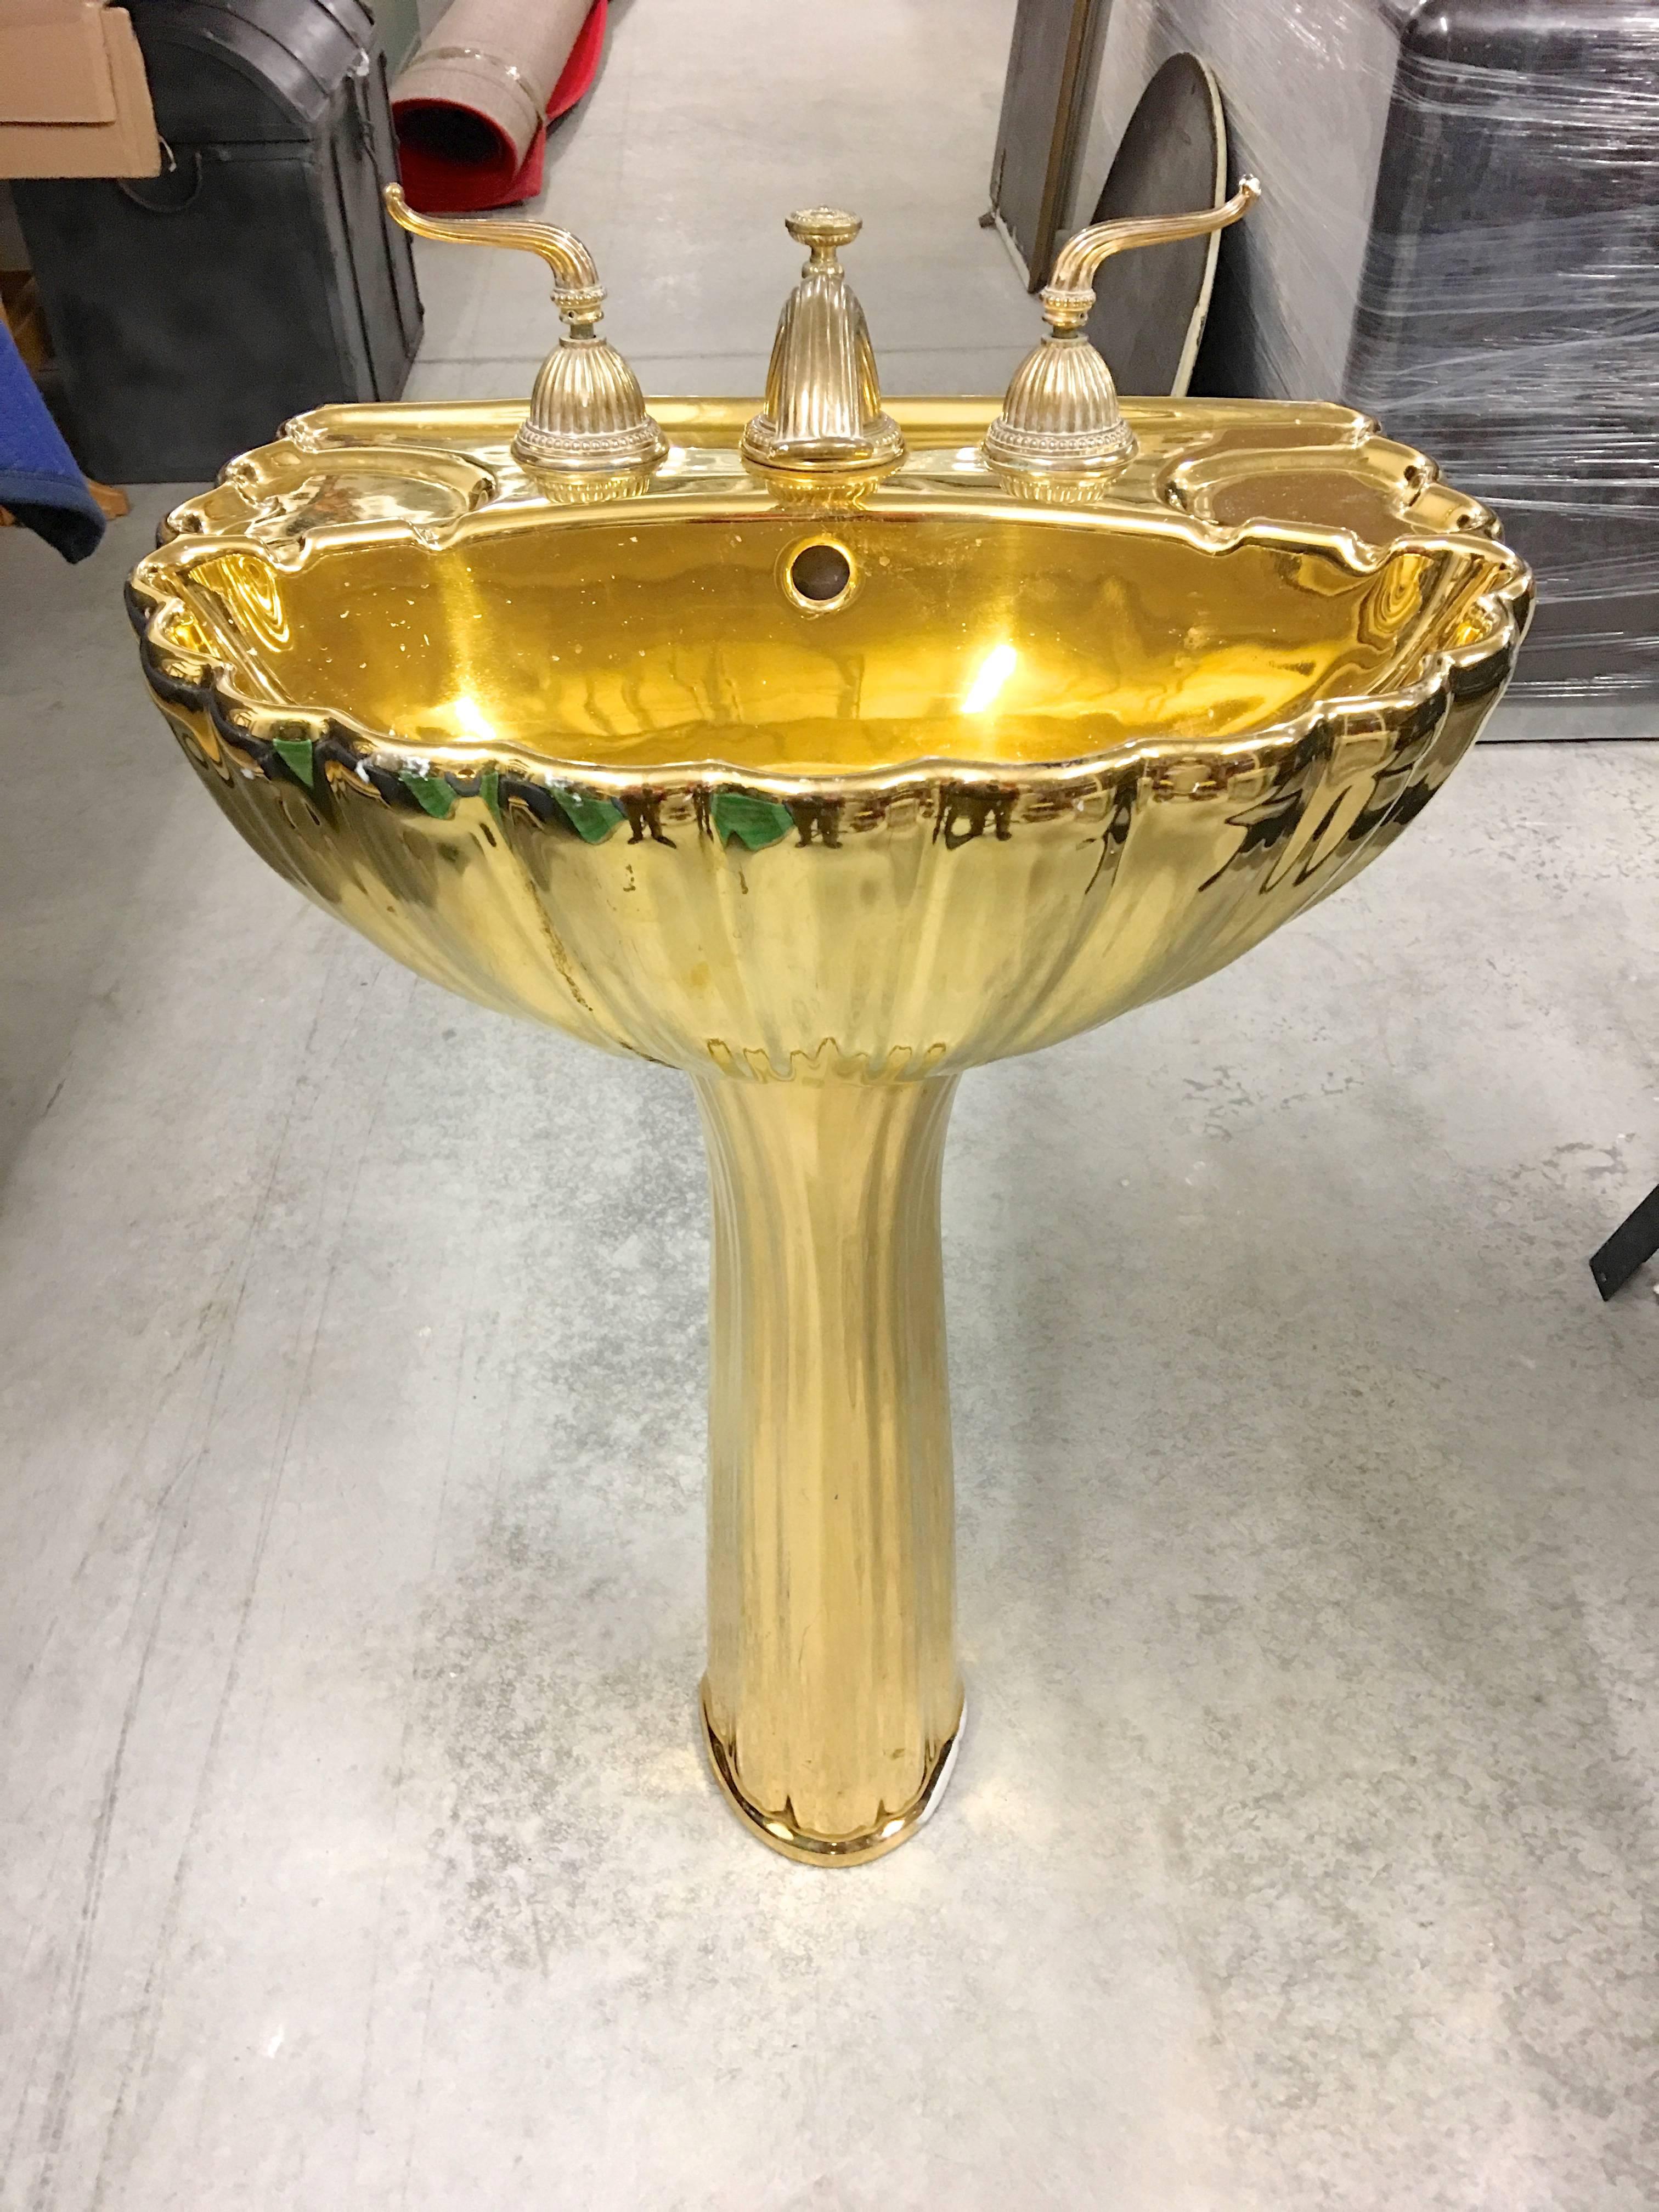 Golden mirror polished brass colored porcelain pedestal sink, attributed to Sherle Wagner. Shell form basin. 
Original gold finished waterworks. Dimensions - 36 inches high by 20 inches wide by 16 inches deep.